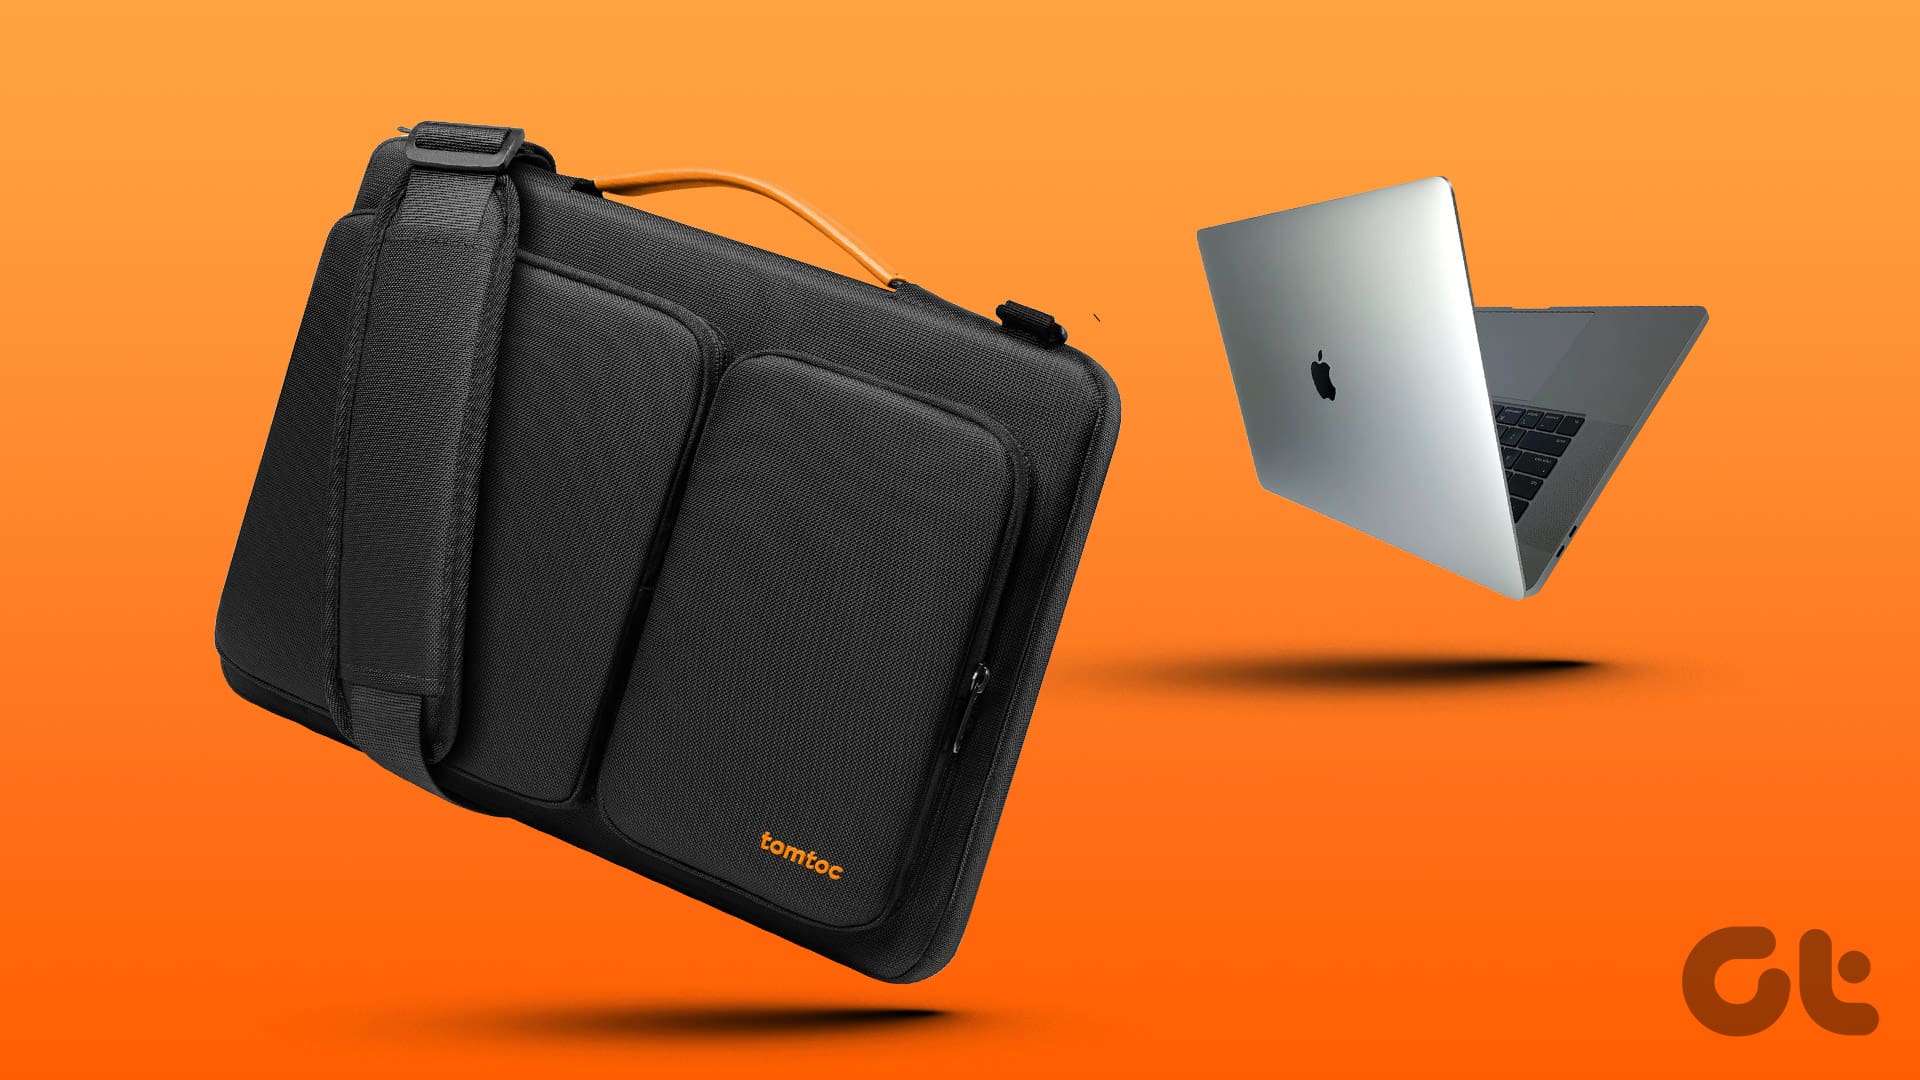 the ultimate designer bag list: 10+ bags that fit your work laptop — ha-na